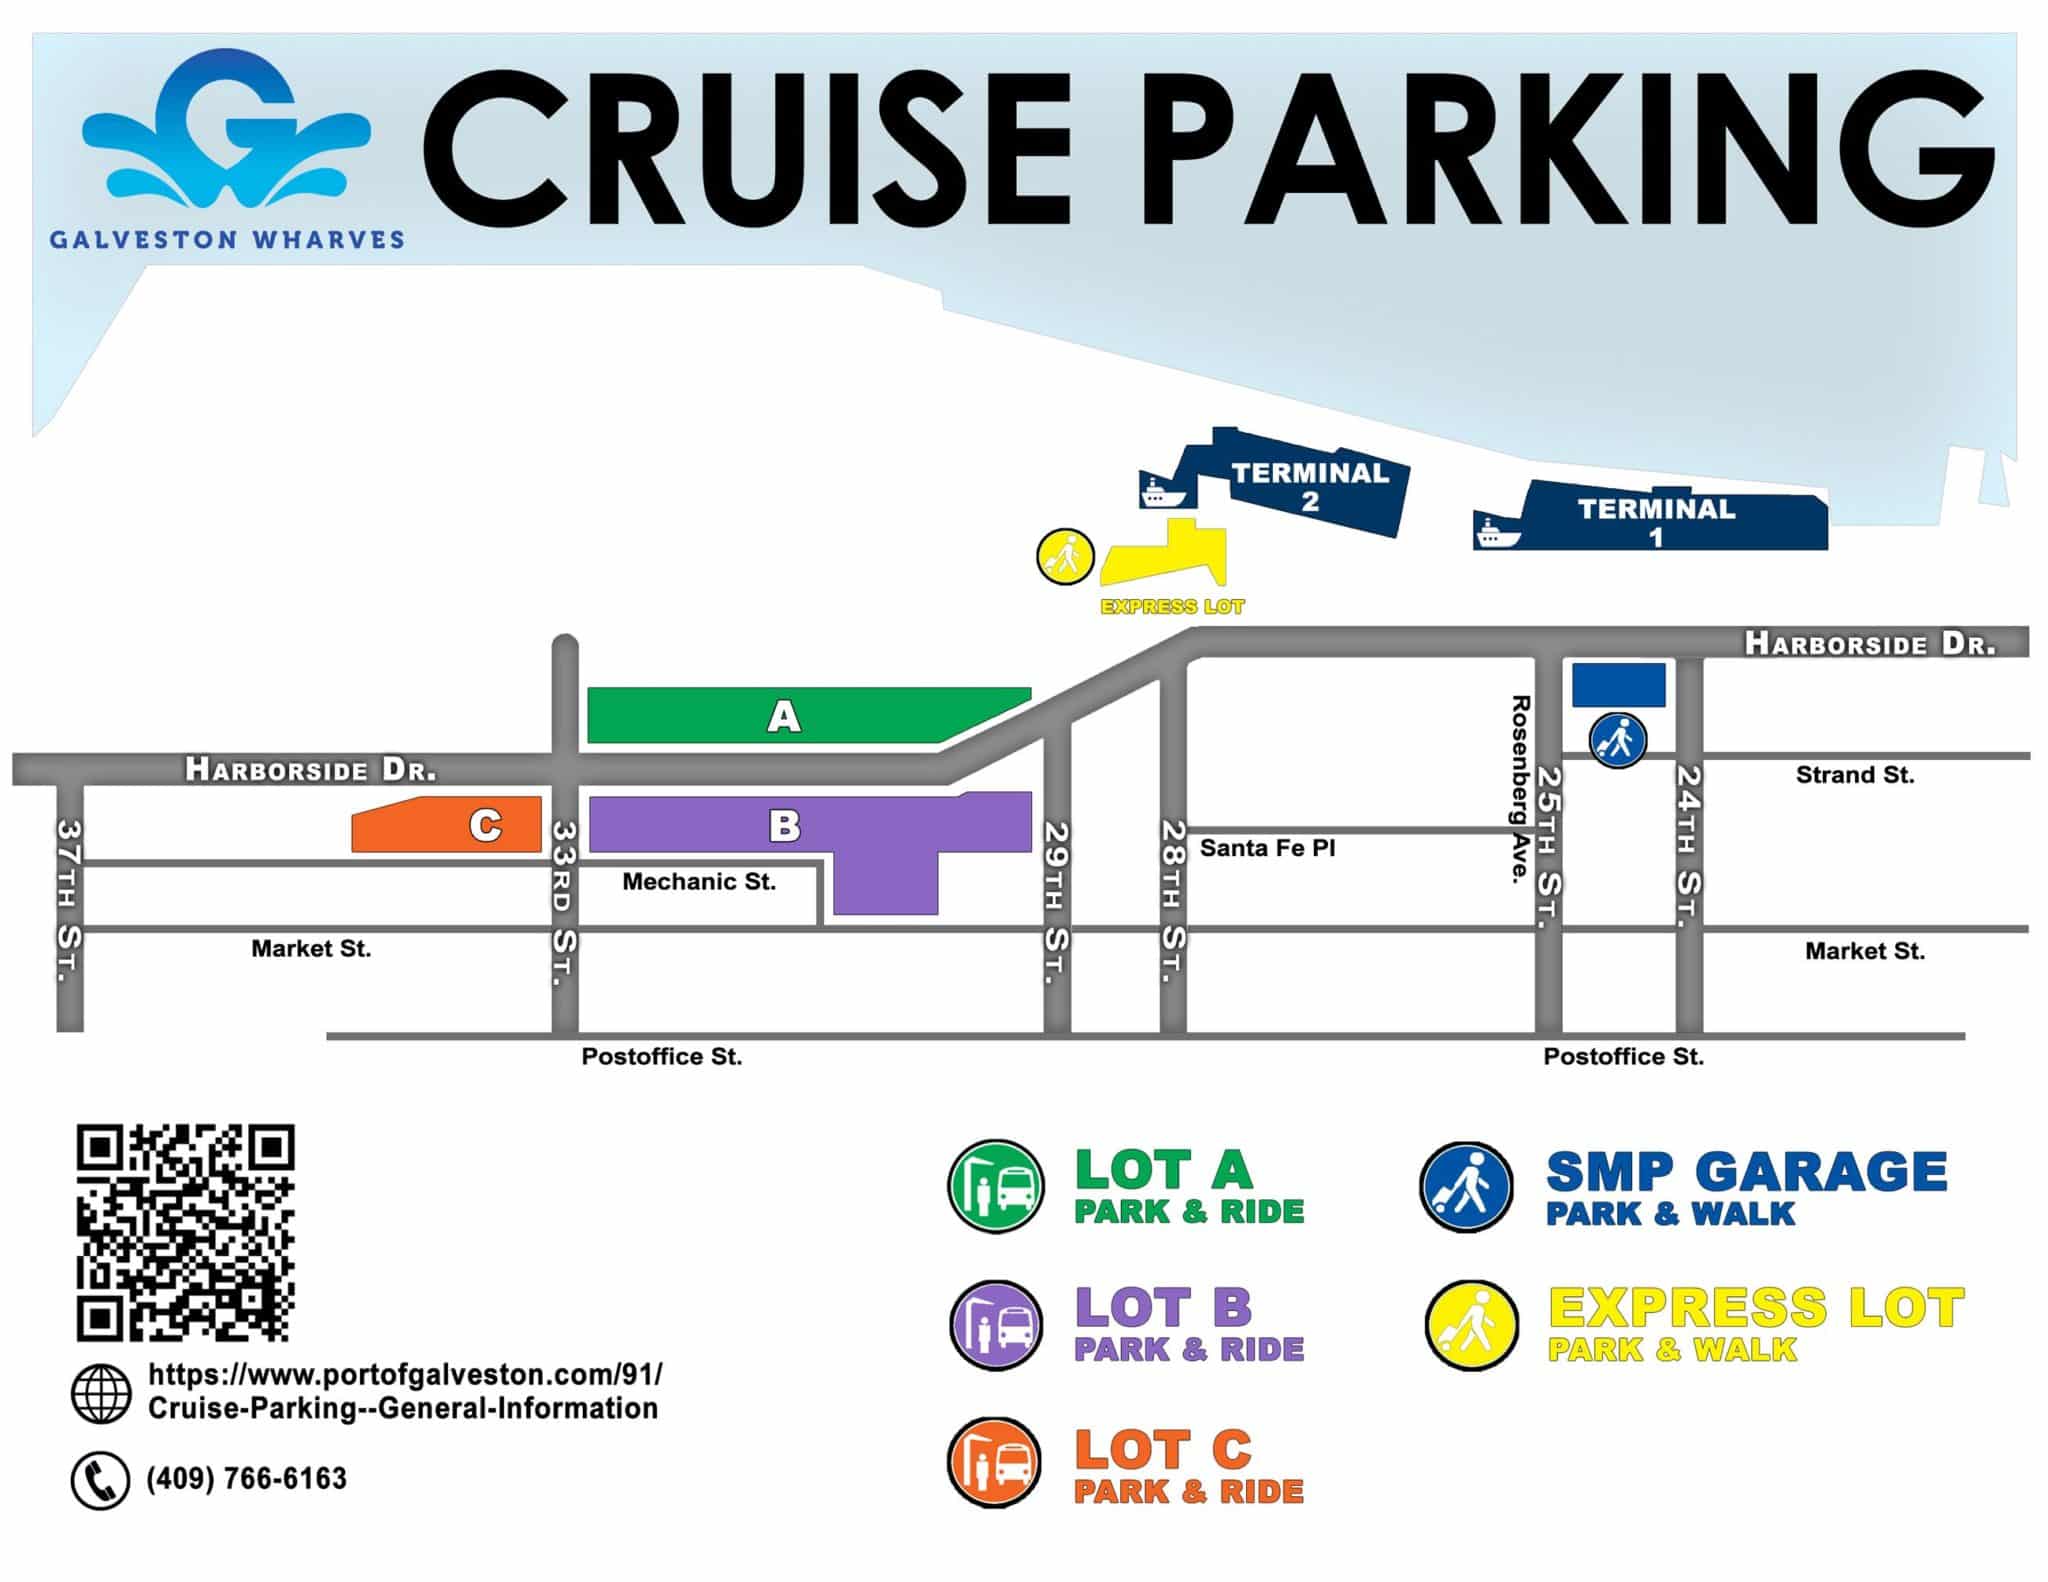 how much is galveston cruise parking